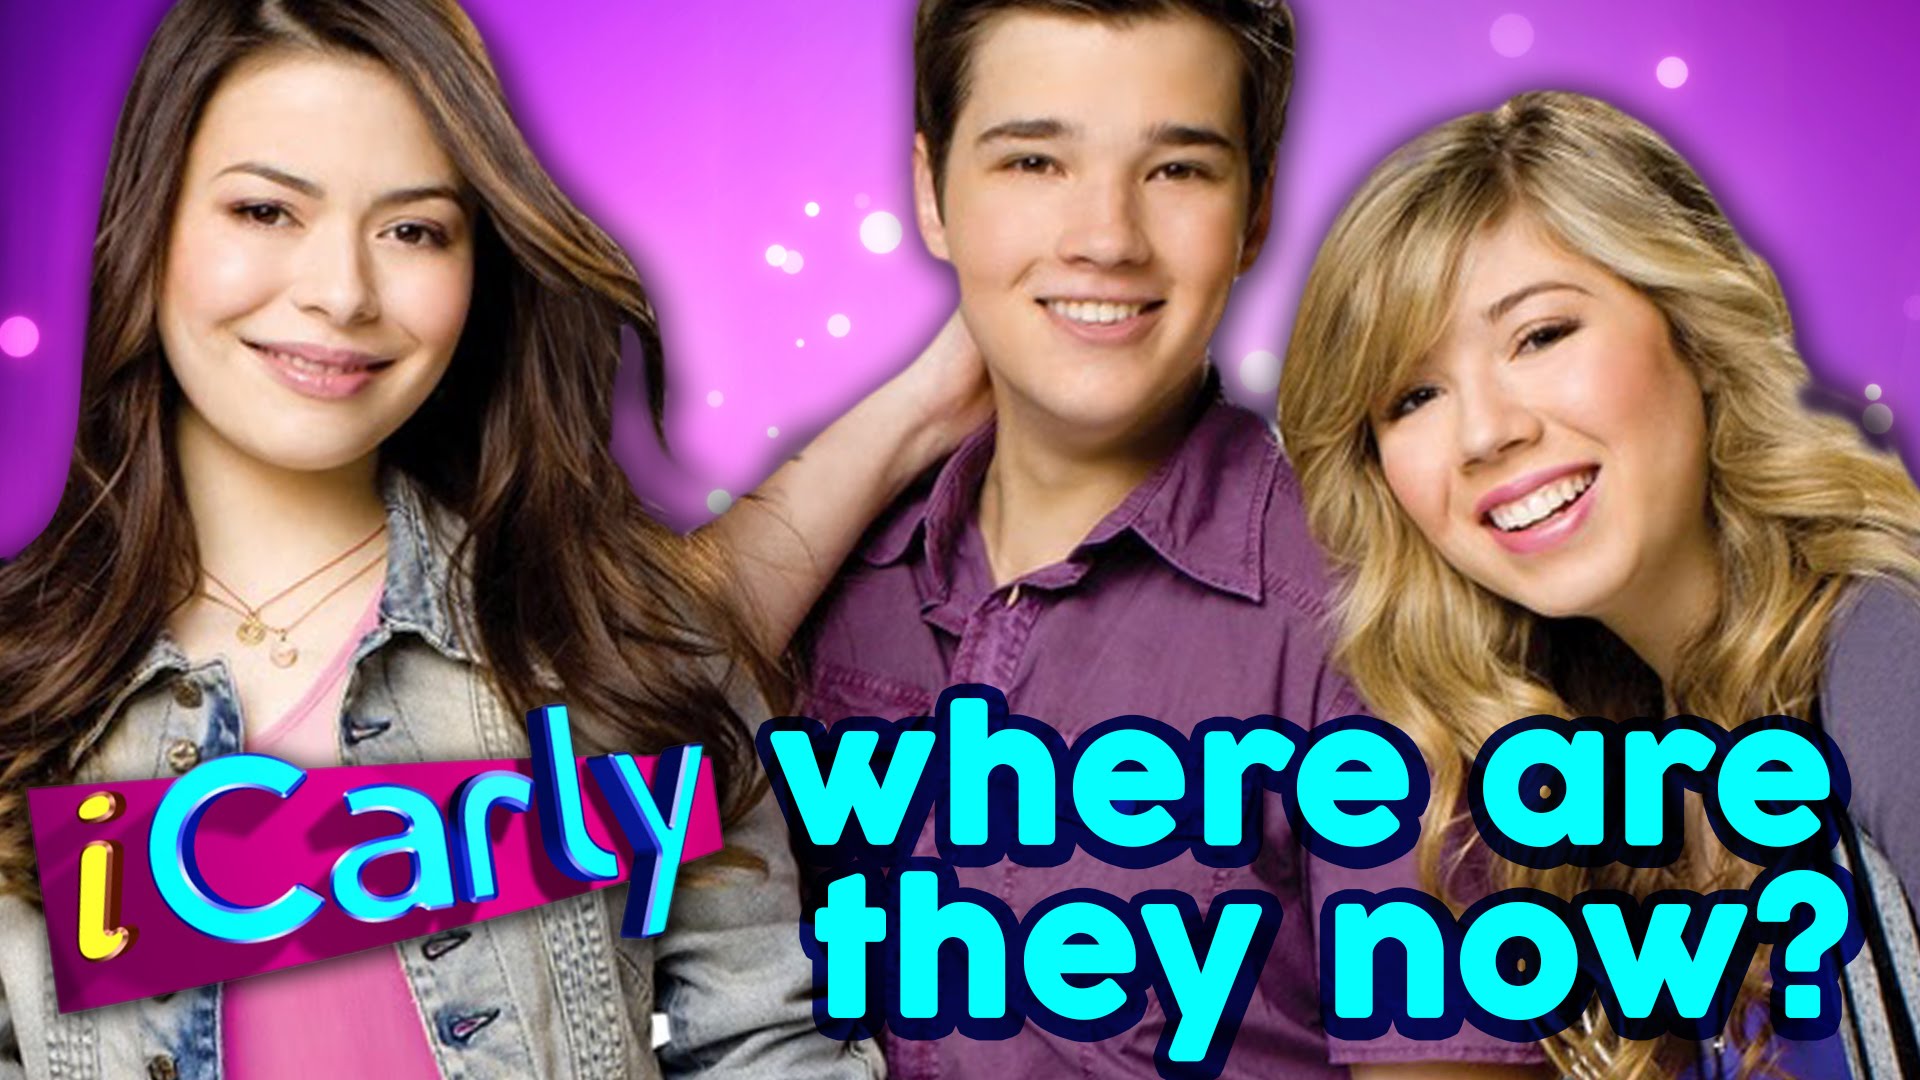 iCarly Cast: Where Are They Now?